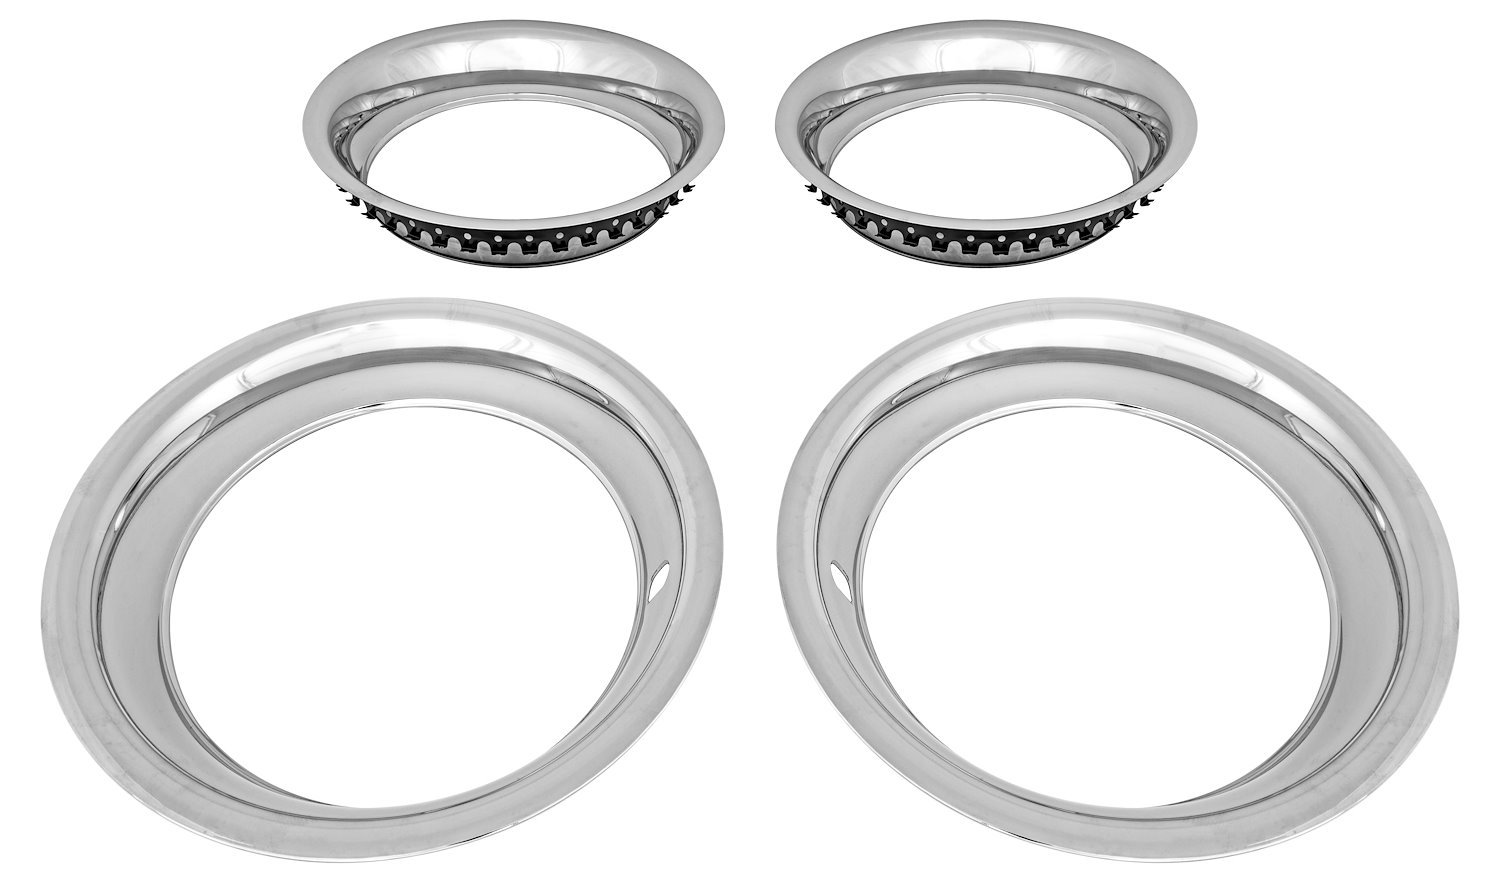 Stainless Steel Trim Ring Set for 14 in. x 6 in. Wheels [1.625 in. D x 1.750 in. W]